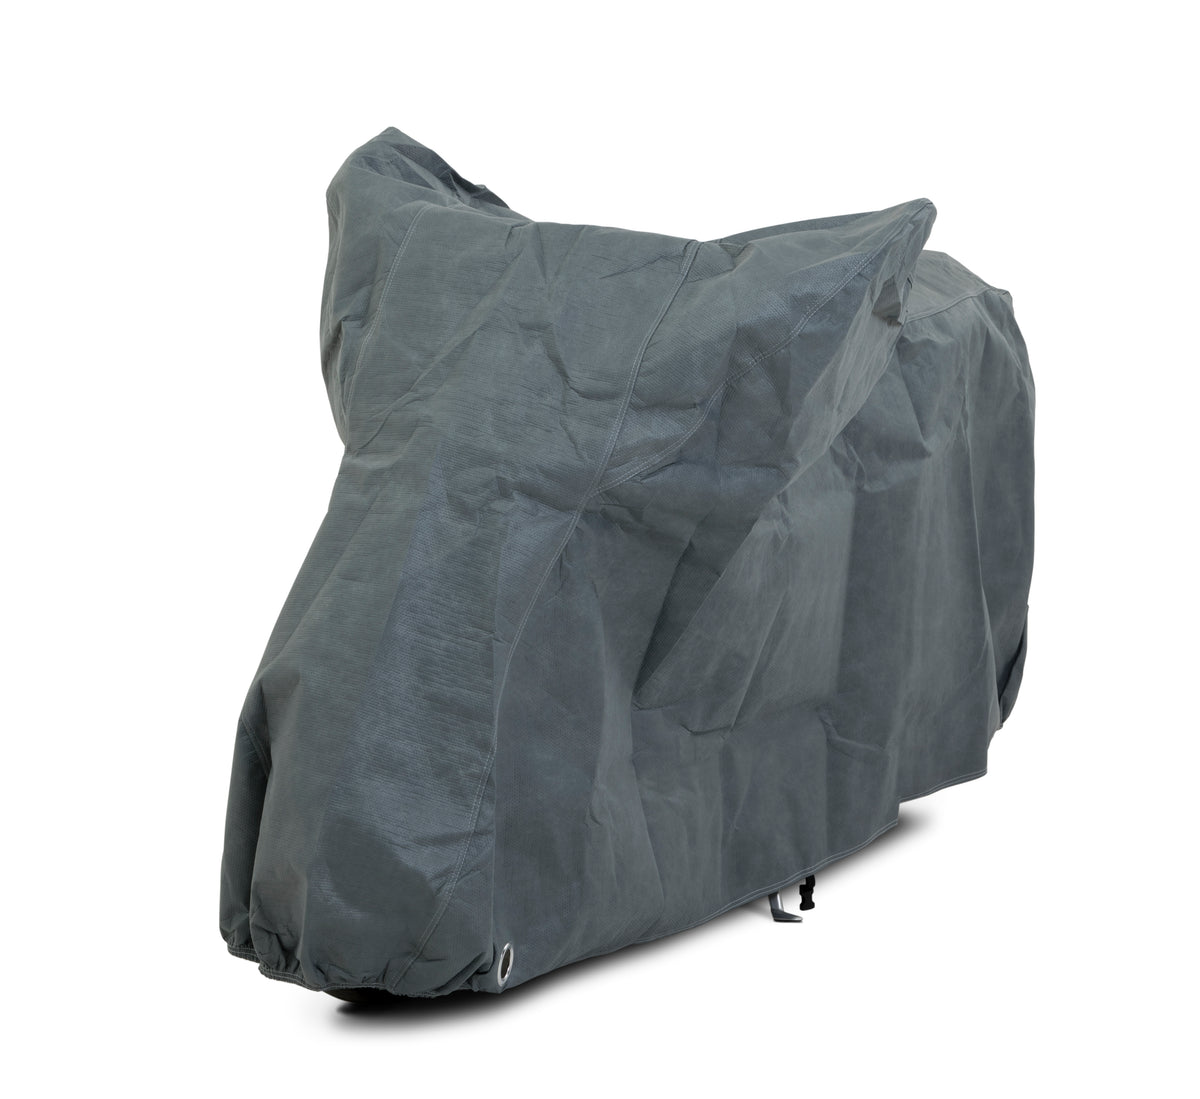 Stormforce best outdoor motorcycle covers for PIAGGIO/VESPA